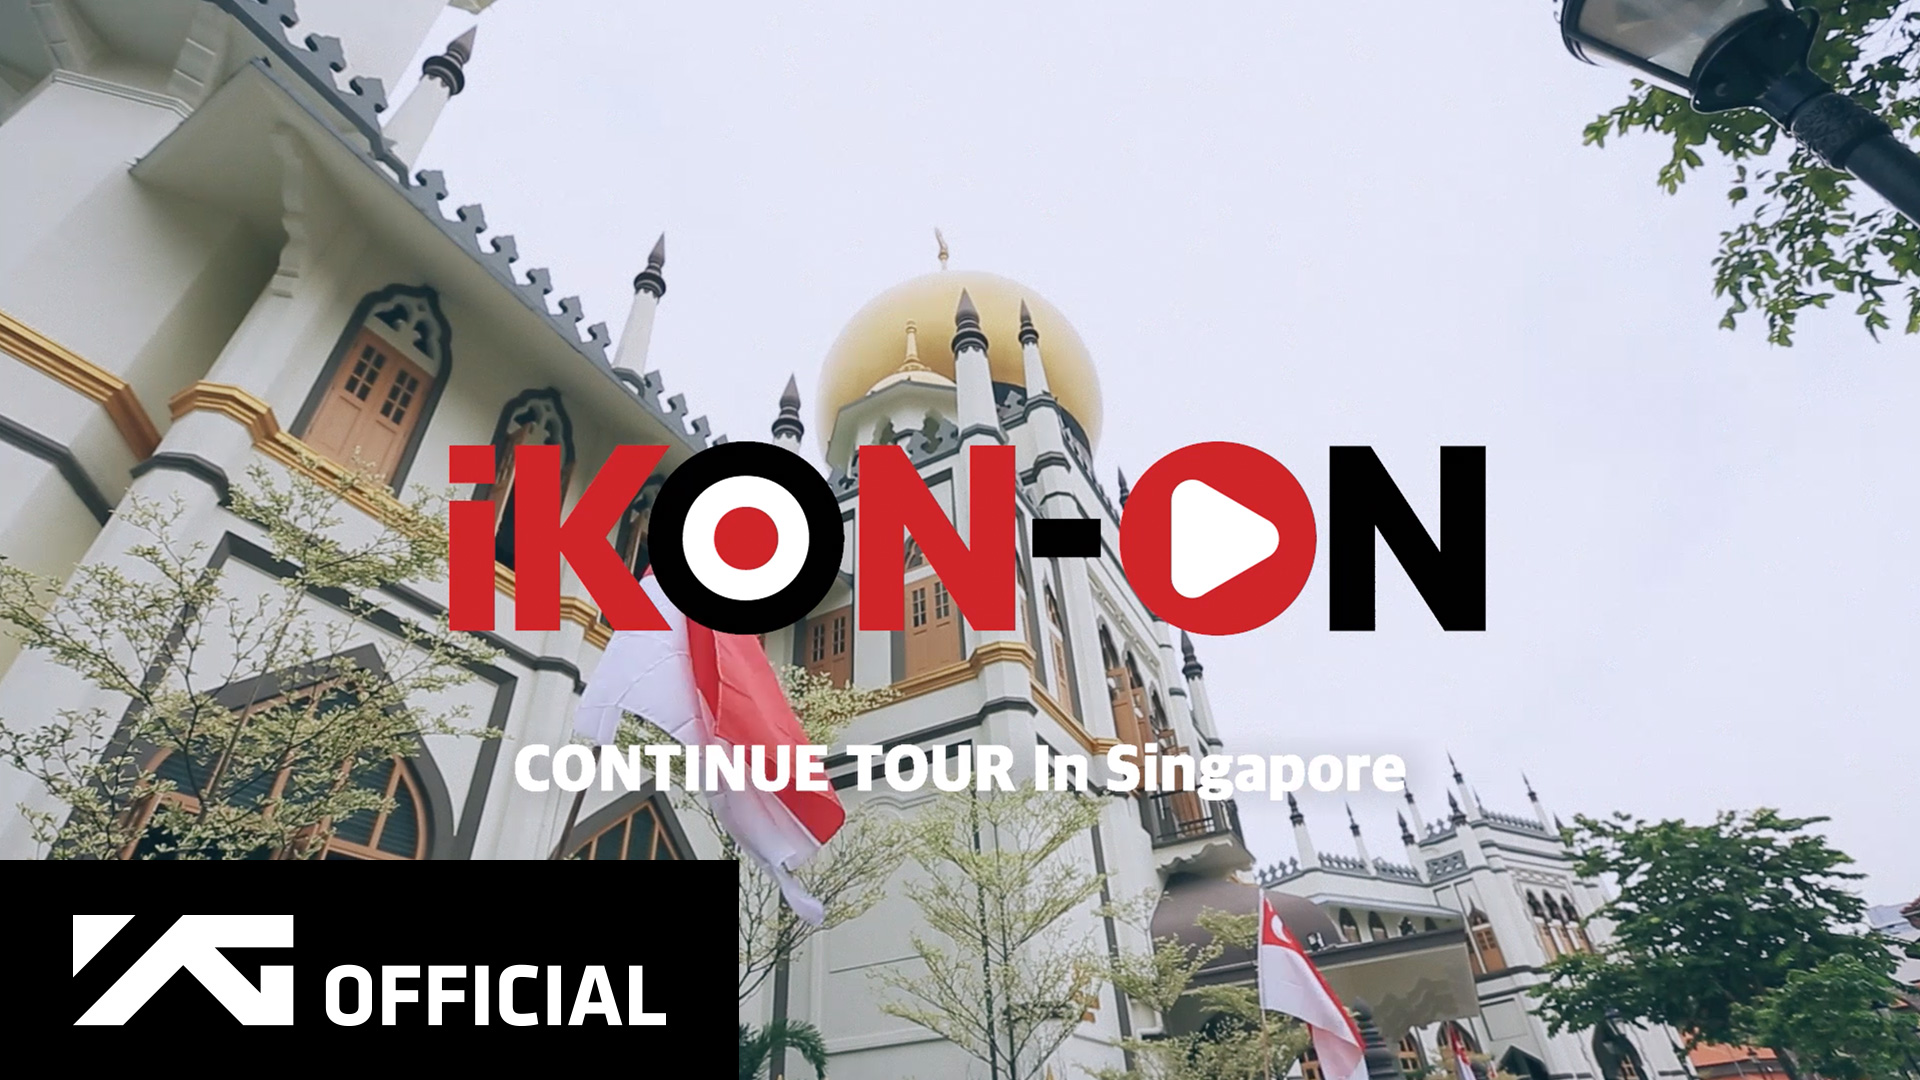 iKON-ON : CONTINUE TOUR IN SINGAPORE